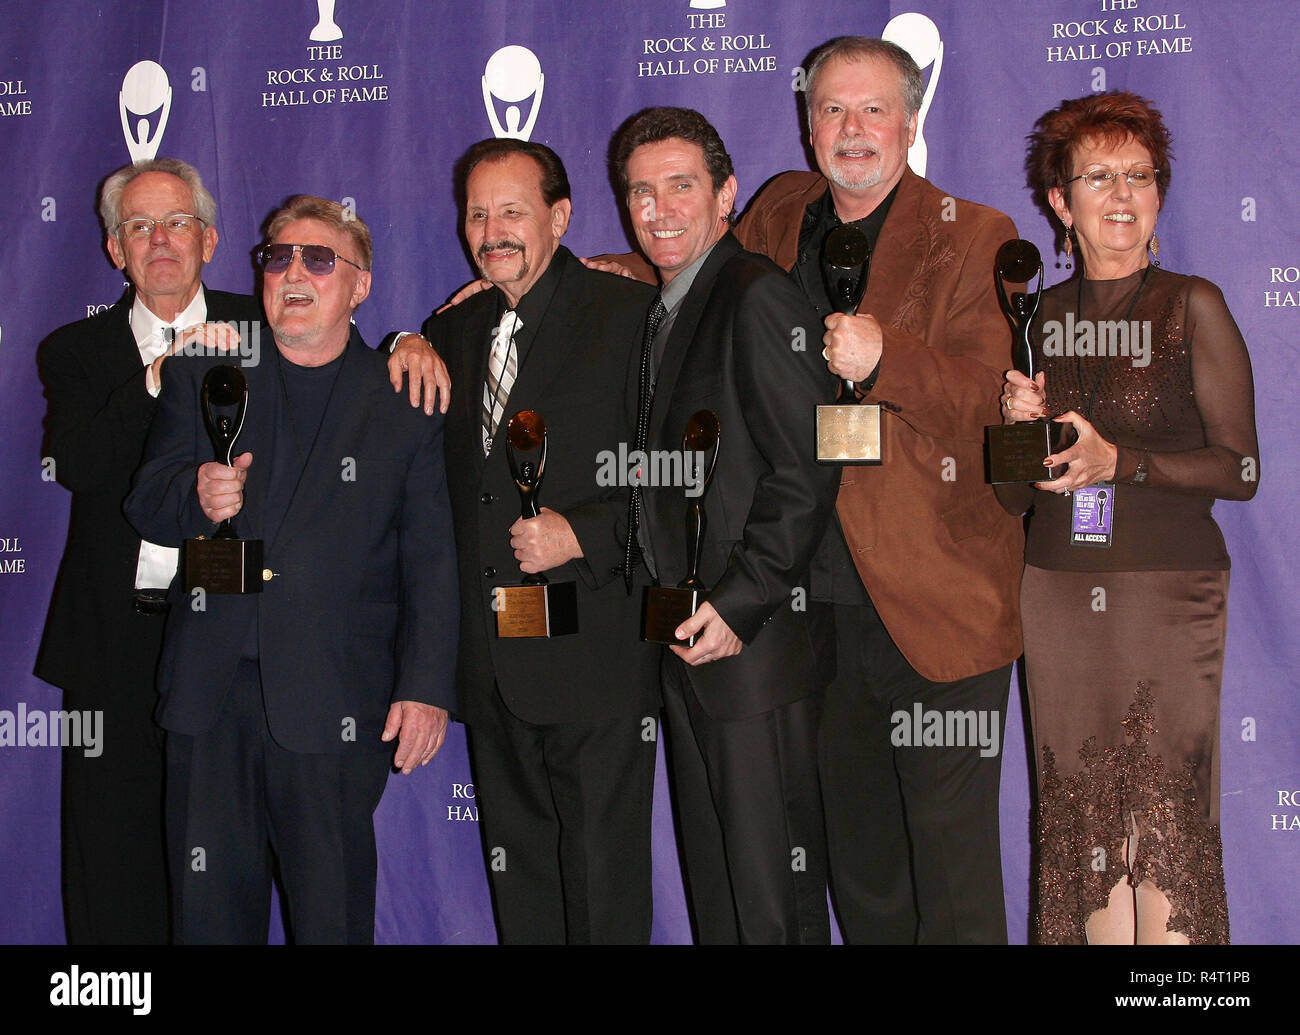 NEW YORK Ð March 10: Members of The Ventures pose in the press room at The  2008 Rock N' Roll Hall of Fame Induction Ceremony at The Waldorf=Astoria  Hotel in New York